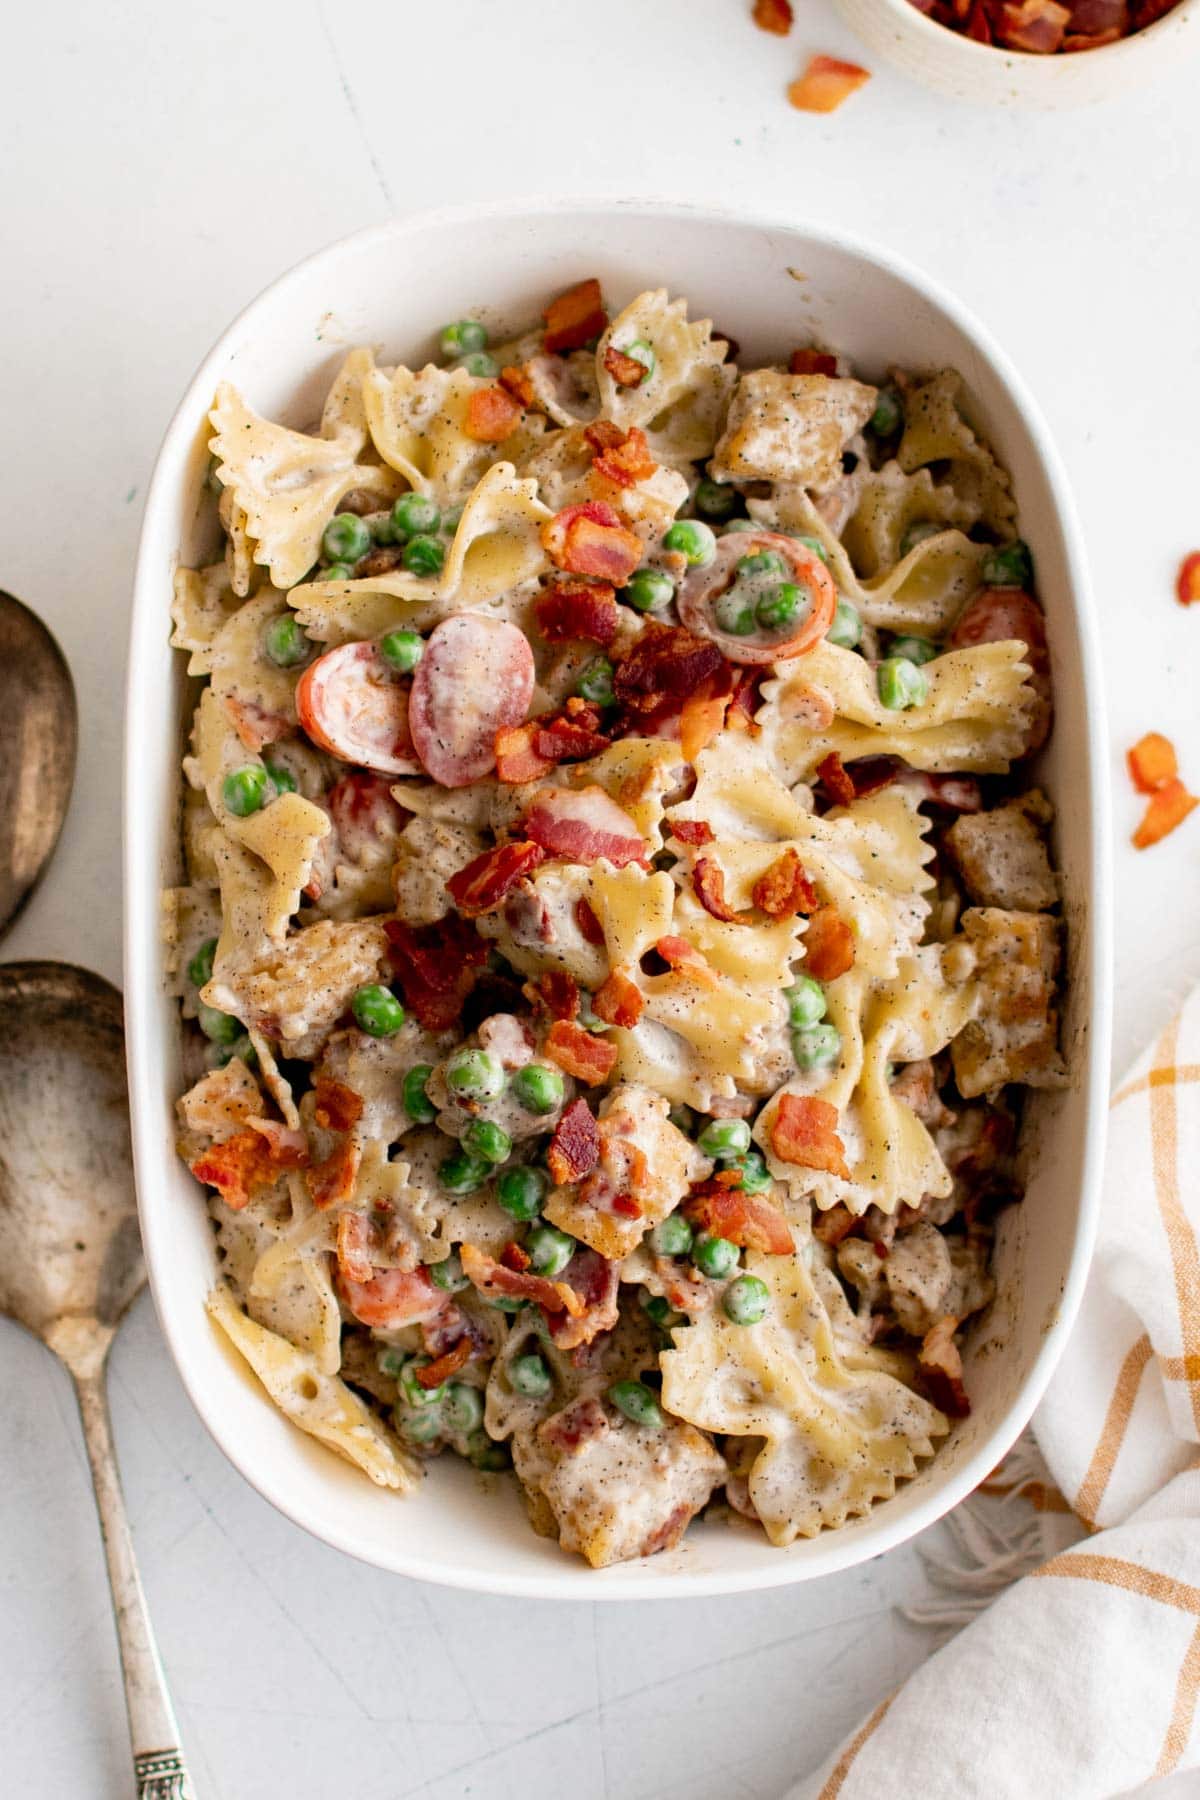 Pasta, peas, bacon and tomatoes and chicken mixed with a dressing and presented in a white serving dish.